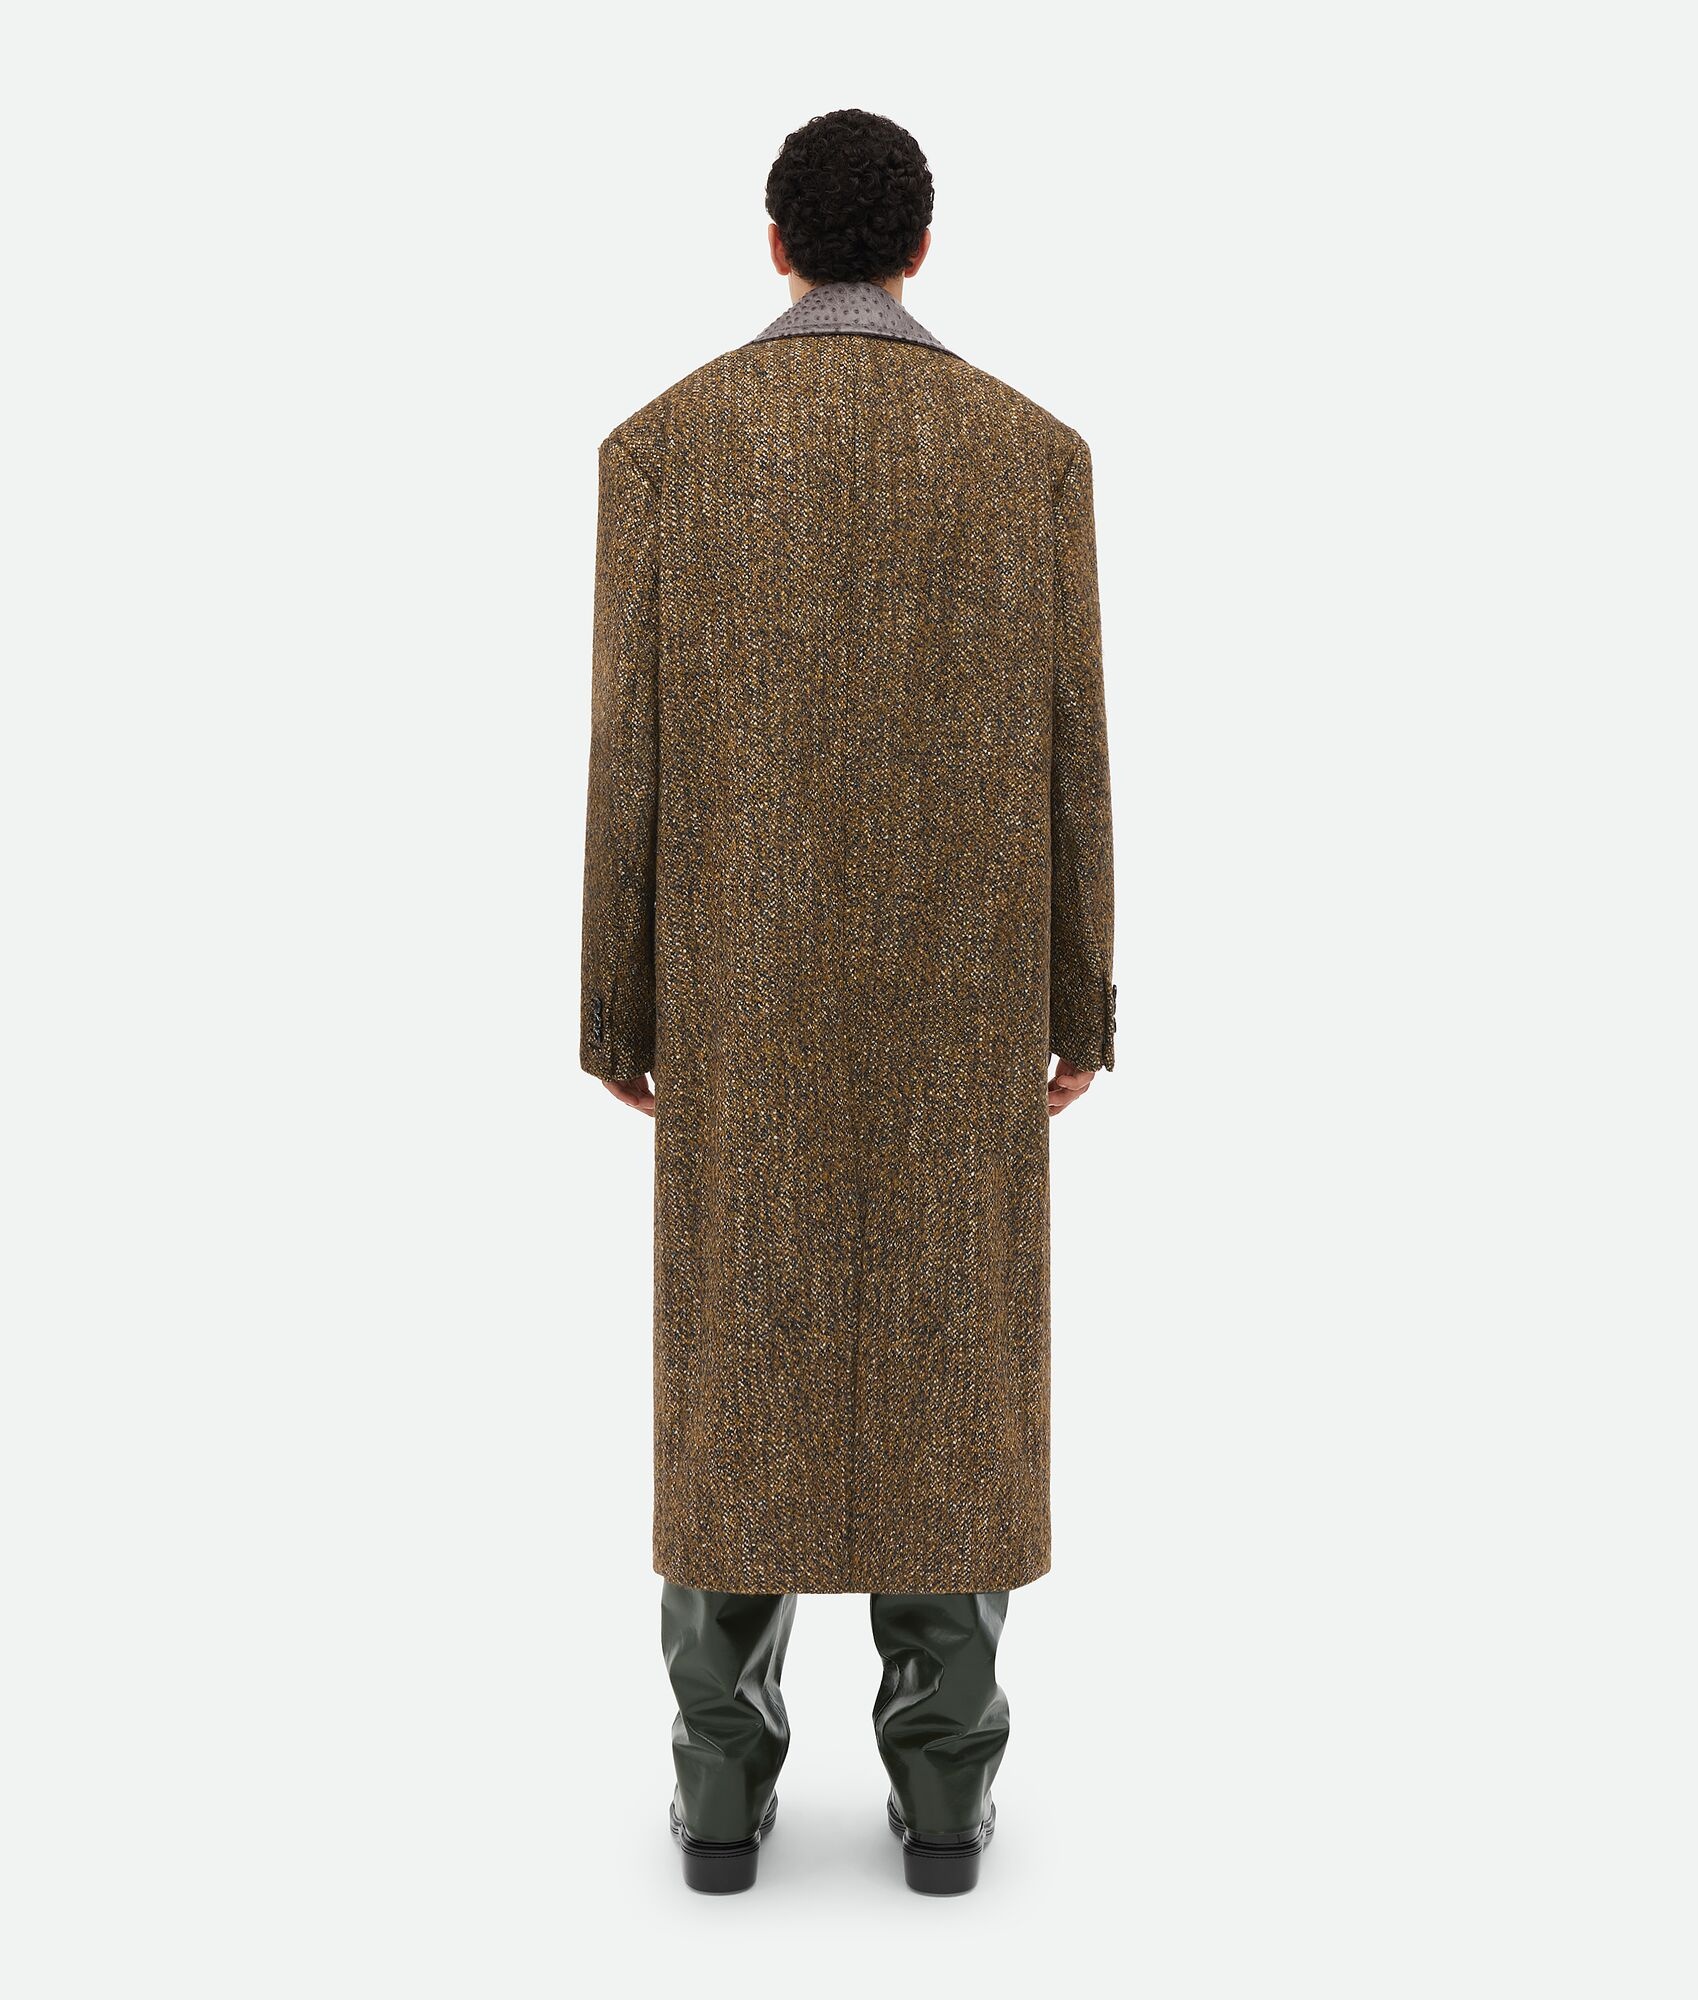 Textured Wool Speckled Coat With Leather Collar - 3